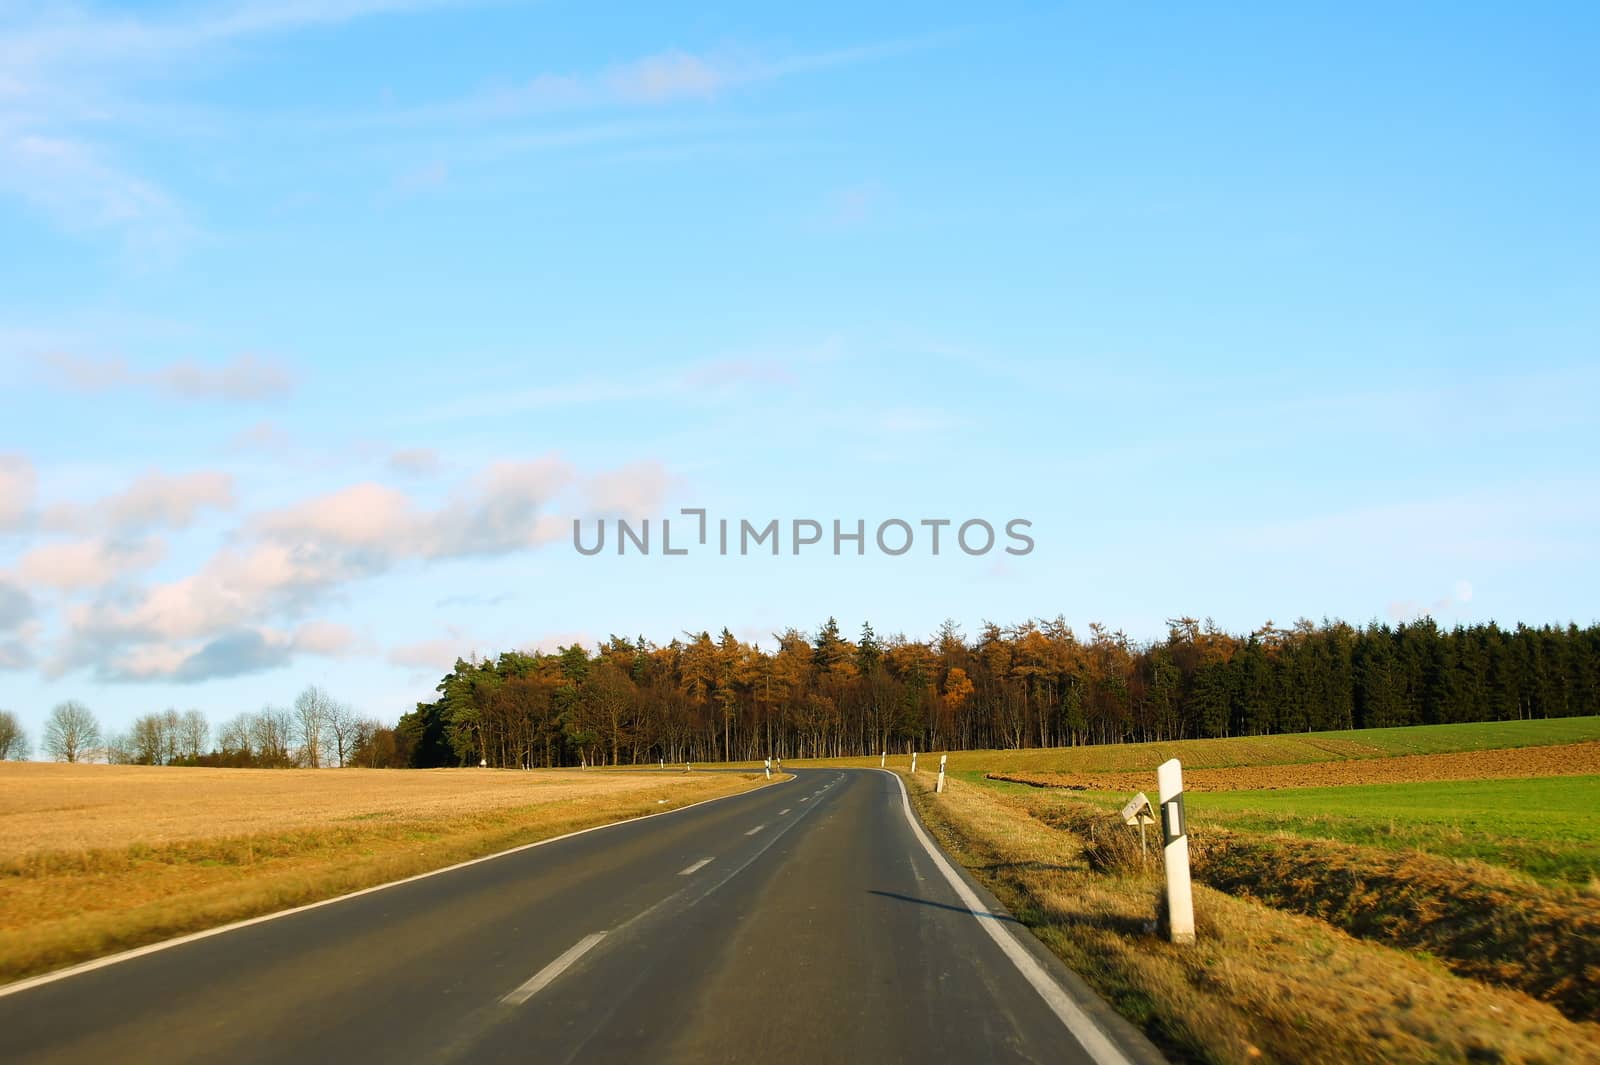 Country road in the Hunsrück, right and left autumnal fields, on the horizon forest